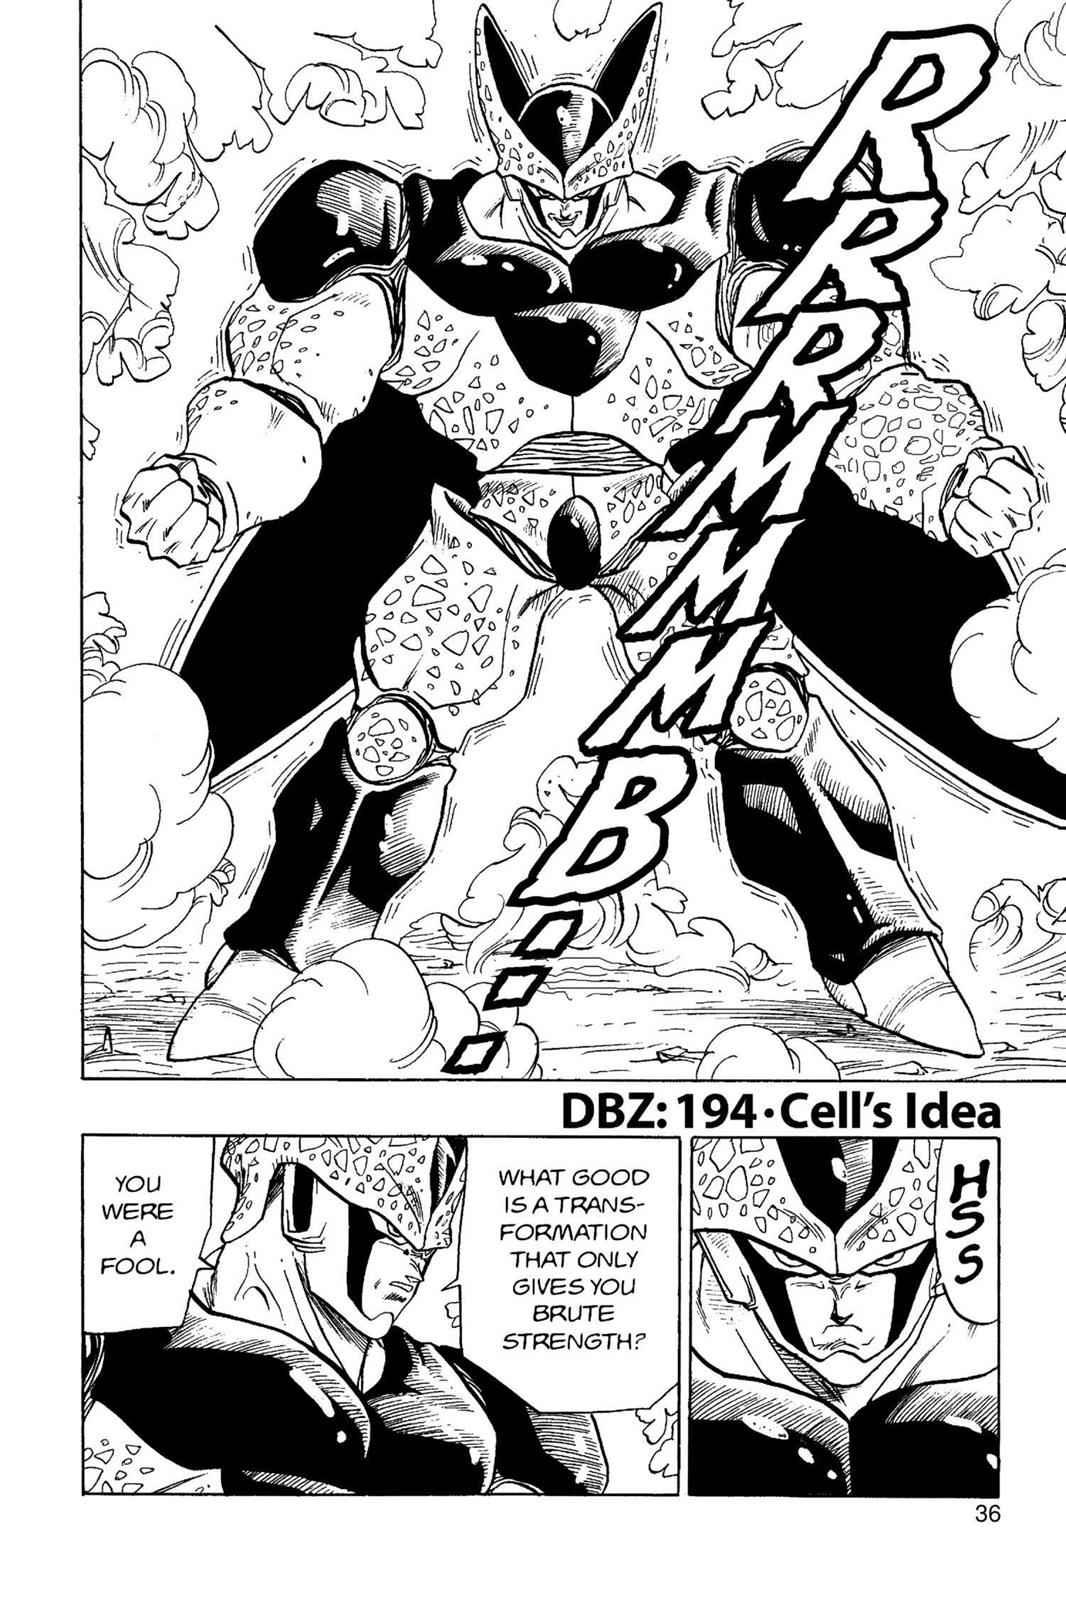 Universe 12 - Hope and despair - Chapter 92, Page 2141 - DBMultiverse